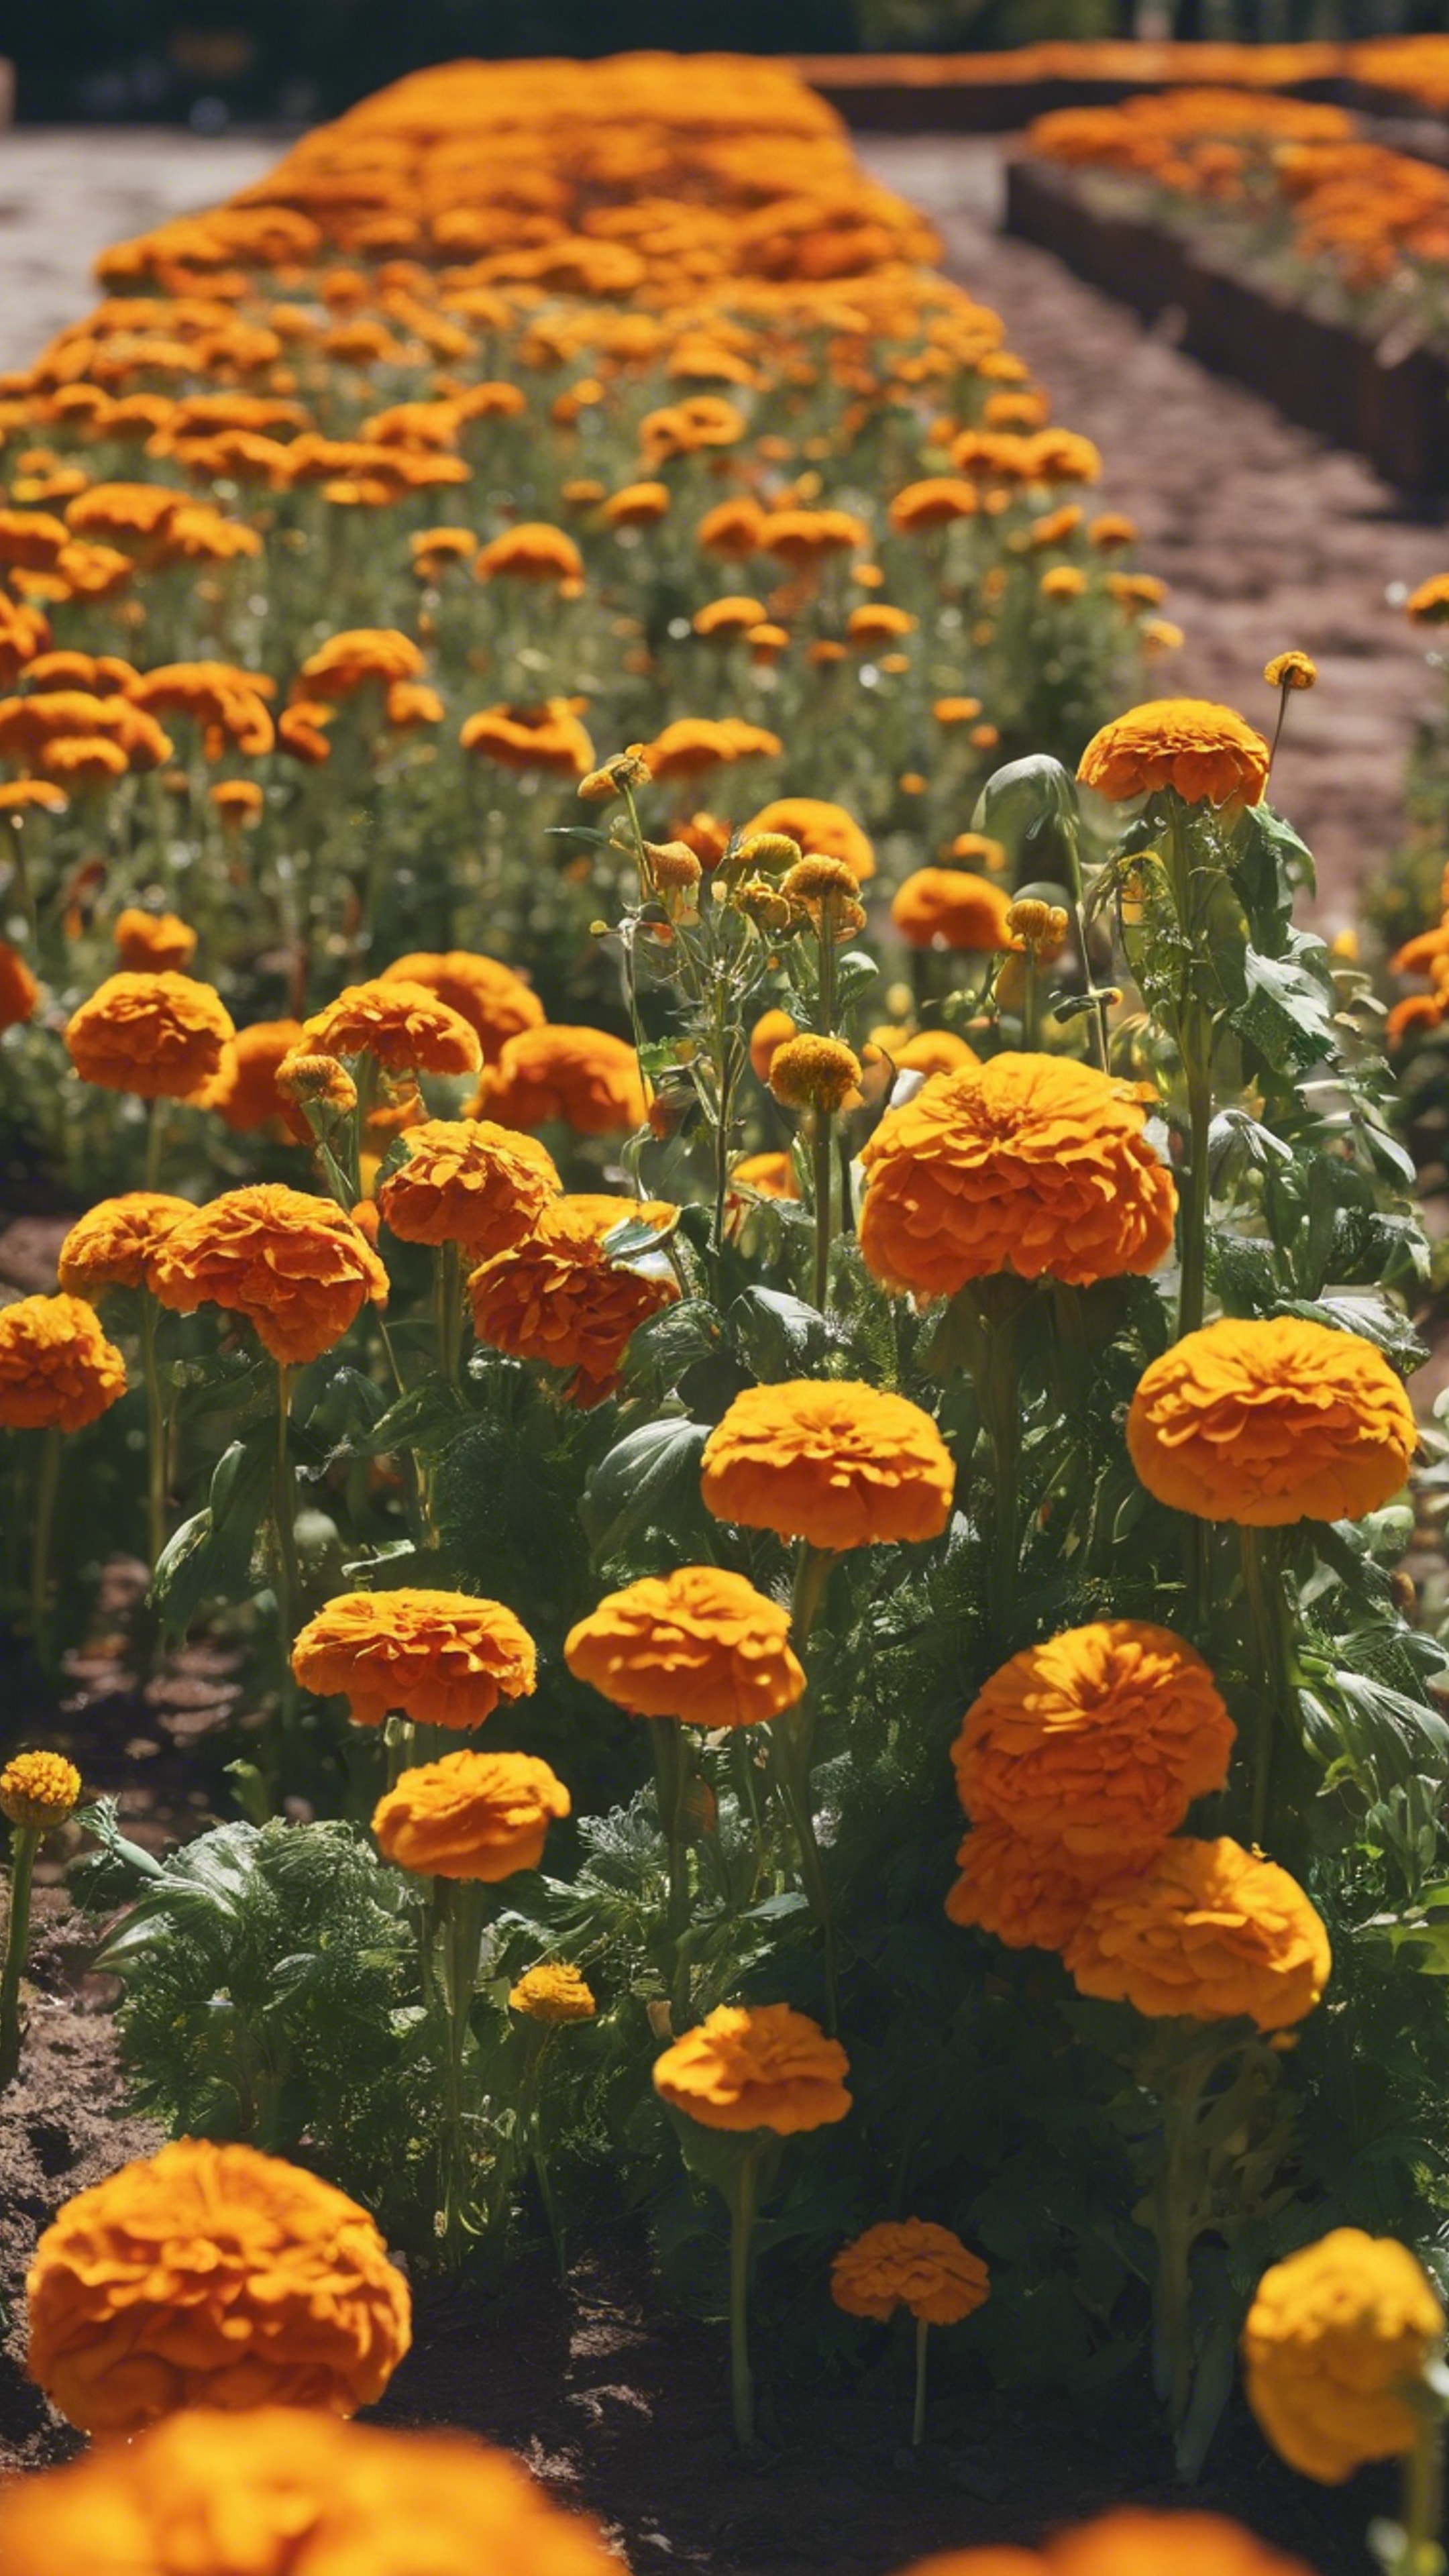 A neat vegetable garden framed by blooming marigolds.壁紙[1d533c38ca684e598445]